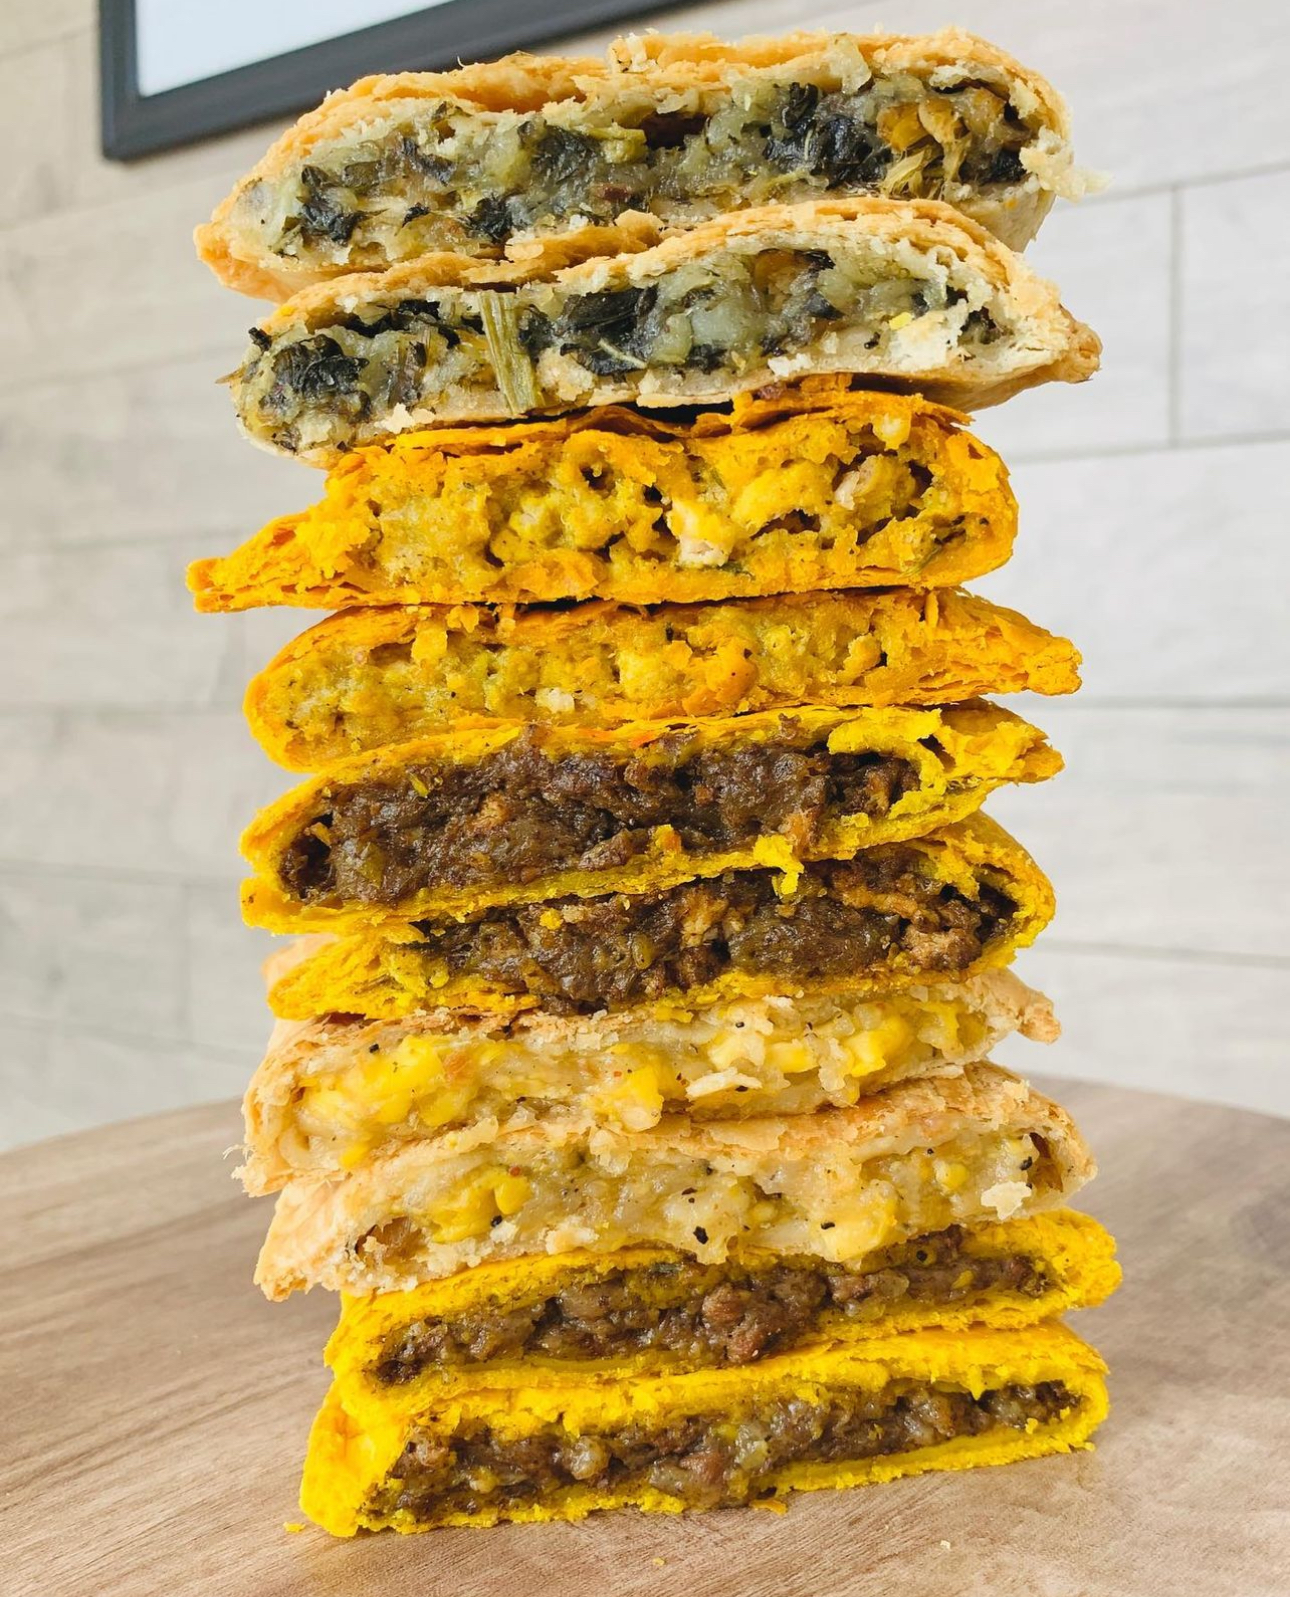 Stack of Jamaican patties from The Original Patty Gyal in Ajax, Ontario